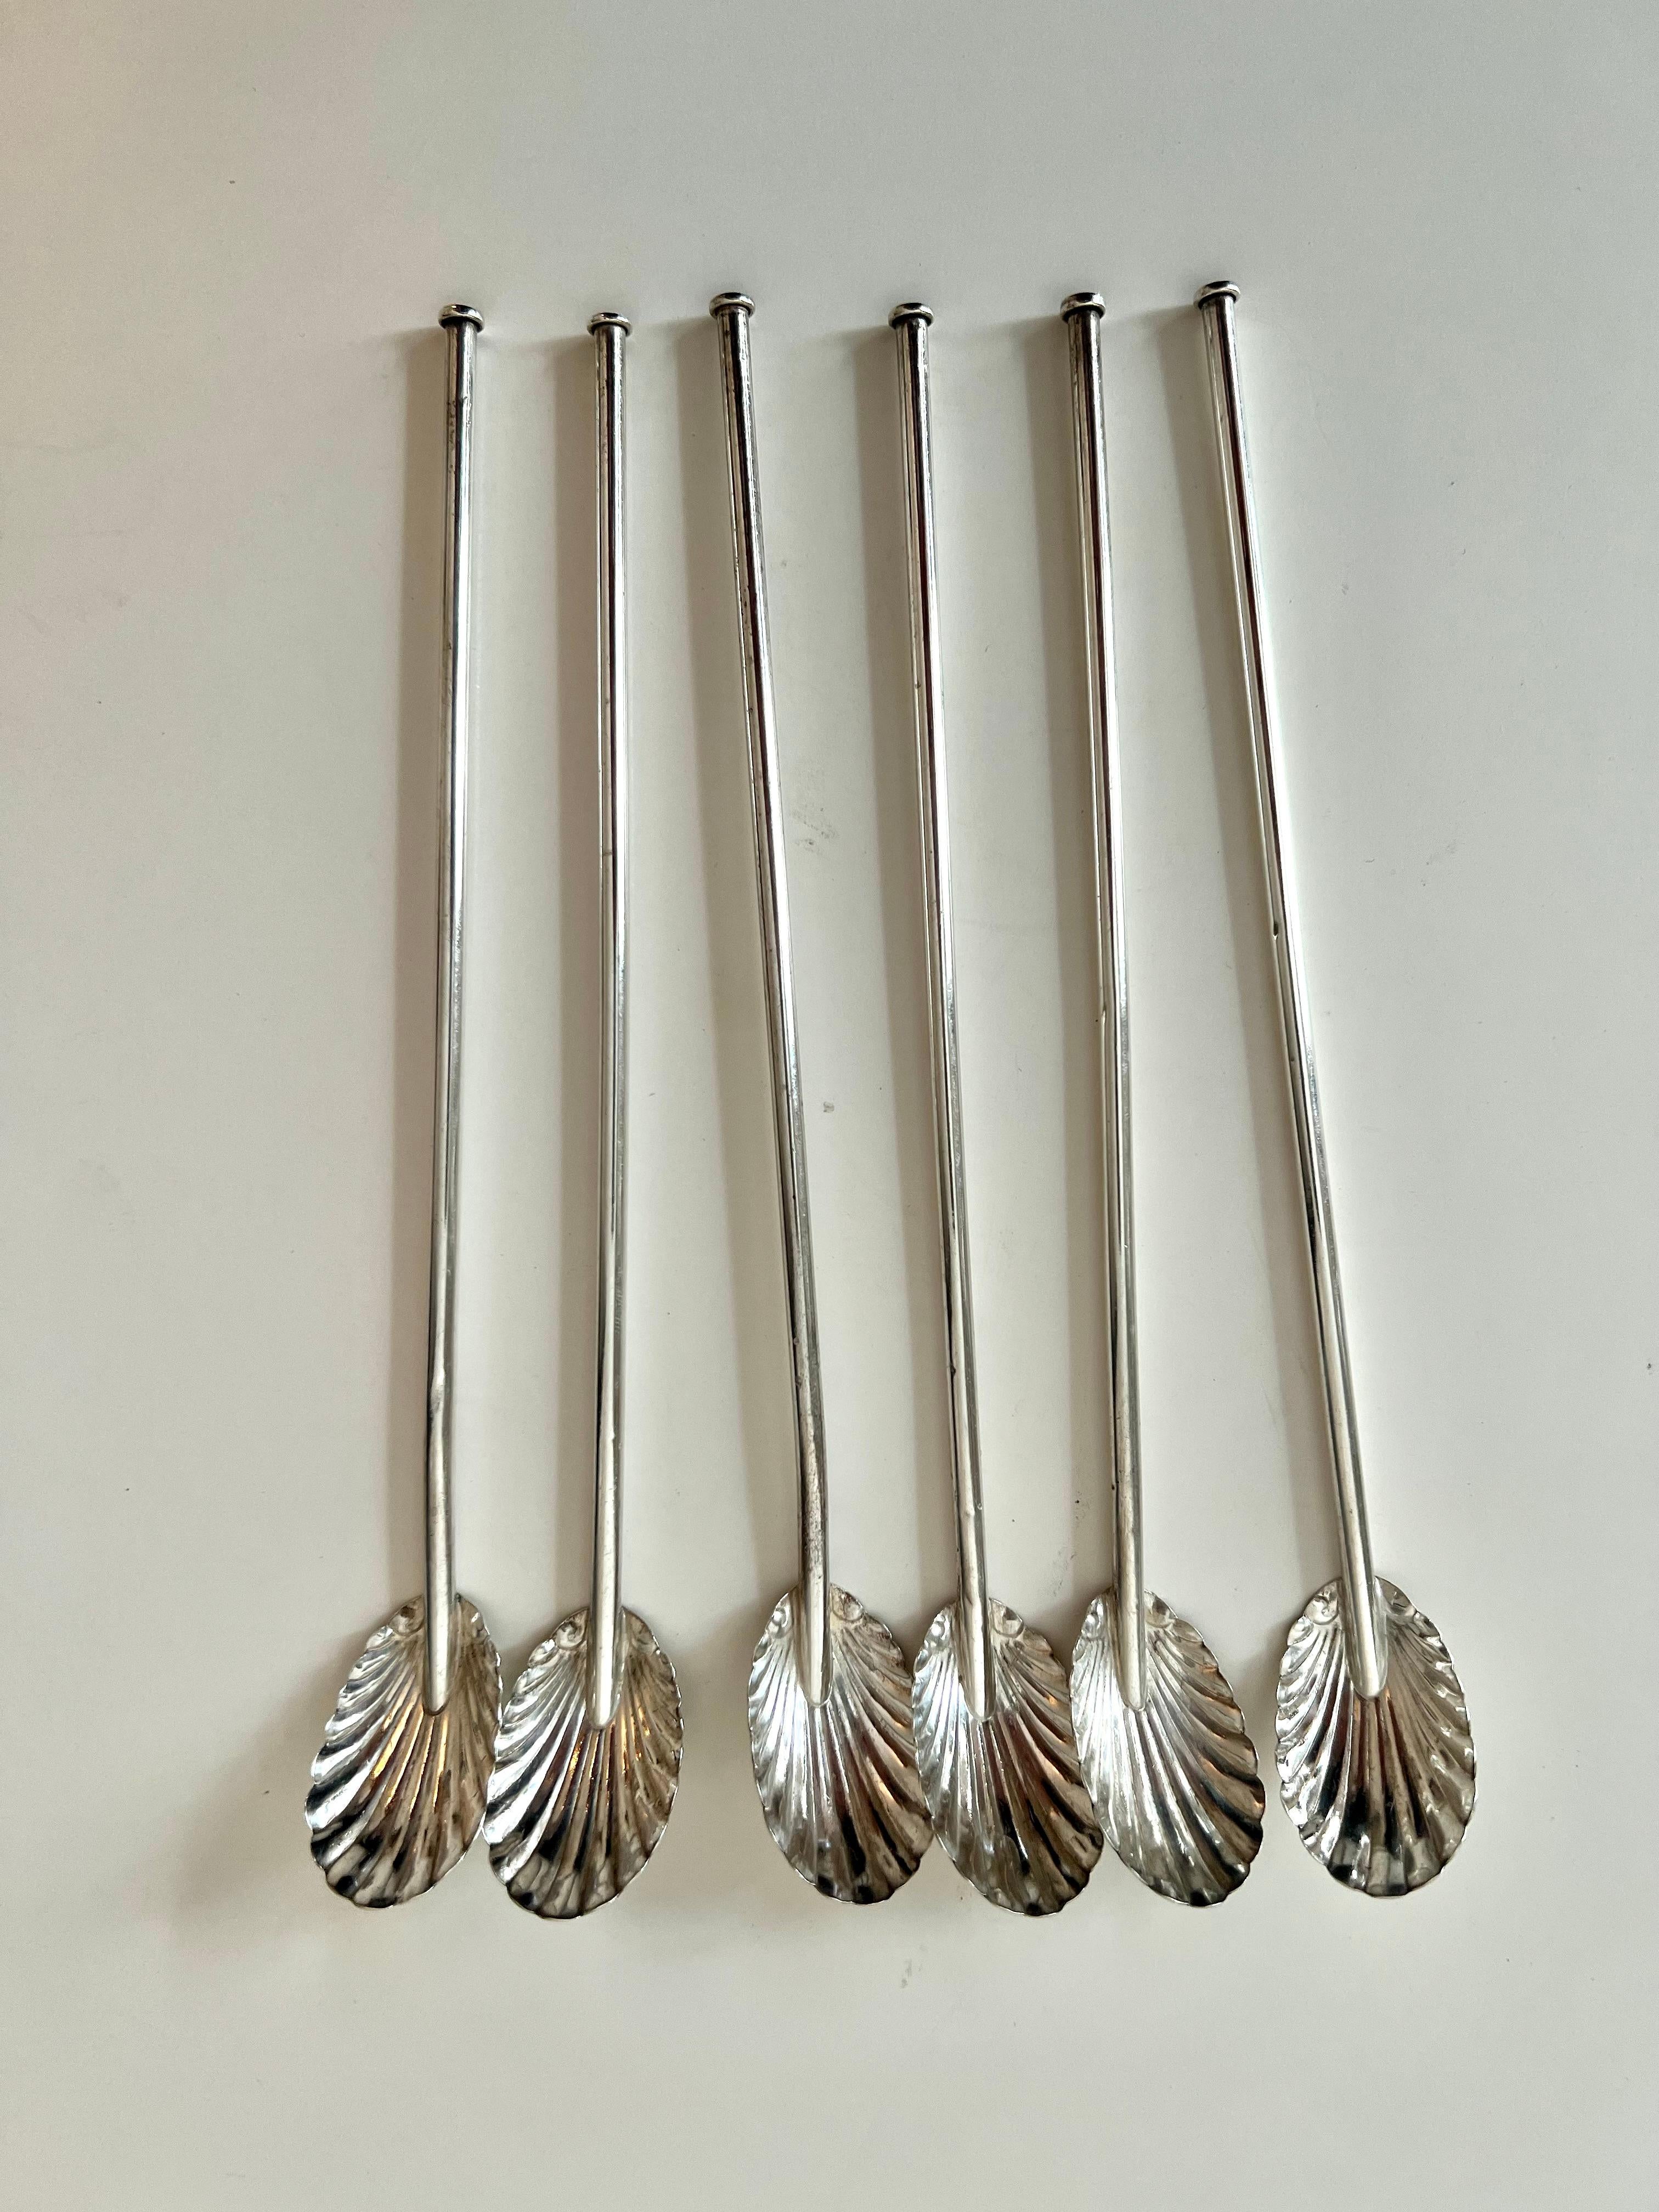 6 French Sterling Iced Tea Scallop Clam Shell Spoons For Sale 2